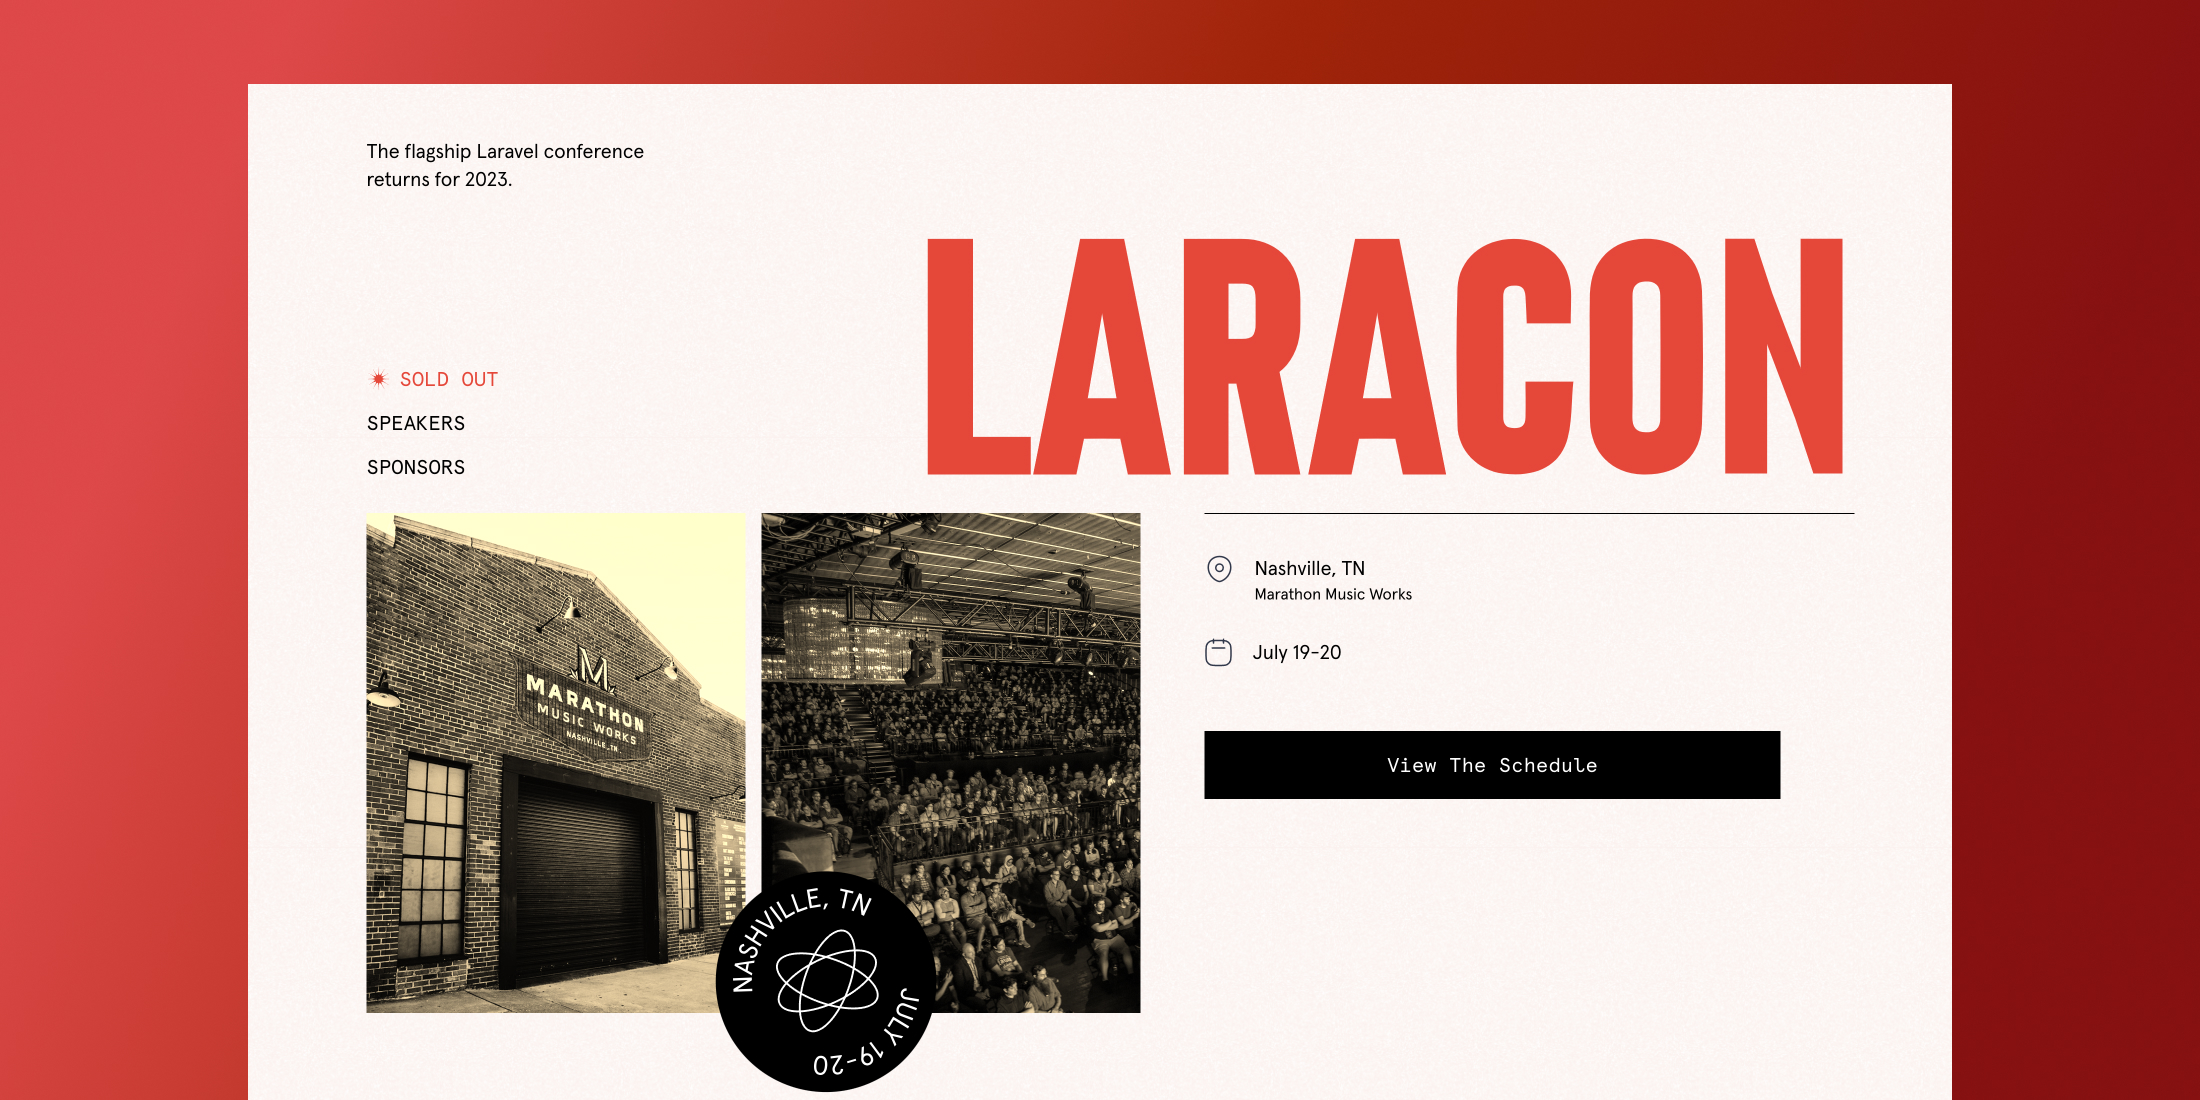 Watch Taylor Otwell's "State of Laravel" keynote from Laracon image